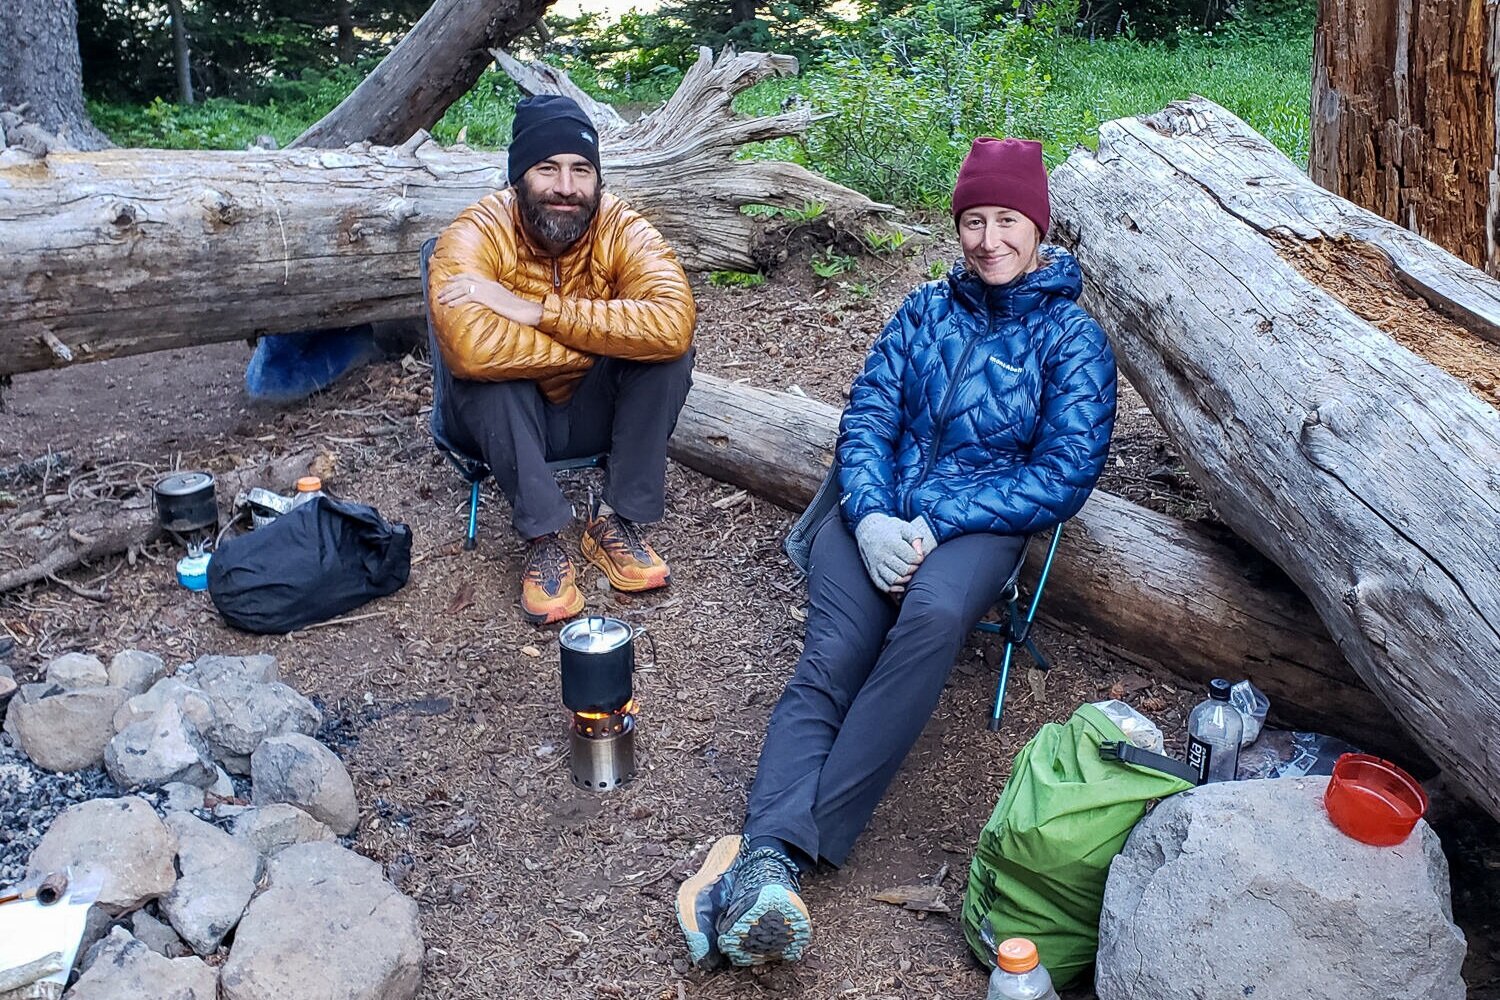 The ultralight Men’s Mountain Hardwear Ghost Whisperer/2 and the women’s Montbell Plasma 1000 Alpine Parka on a summer backpacking trip in Badger Creek Wilderness.